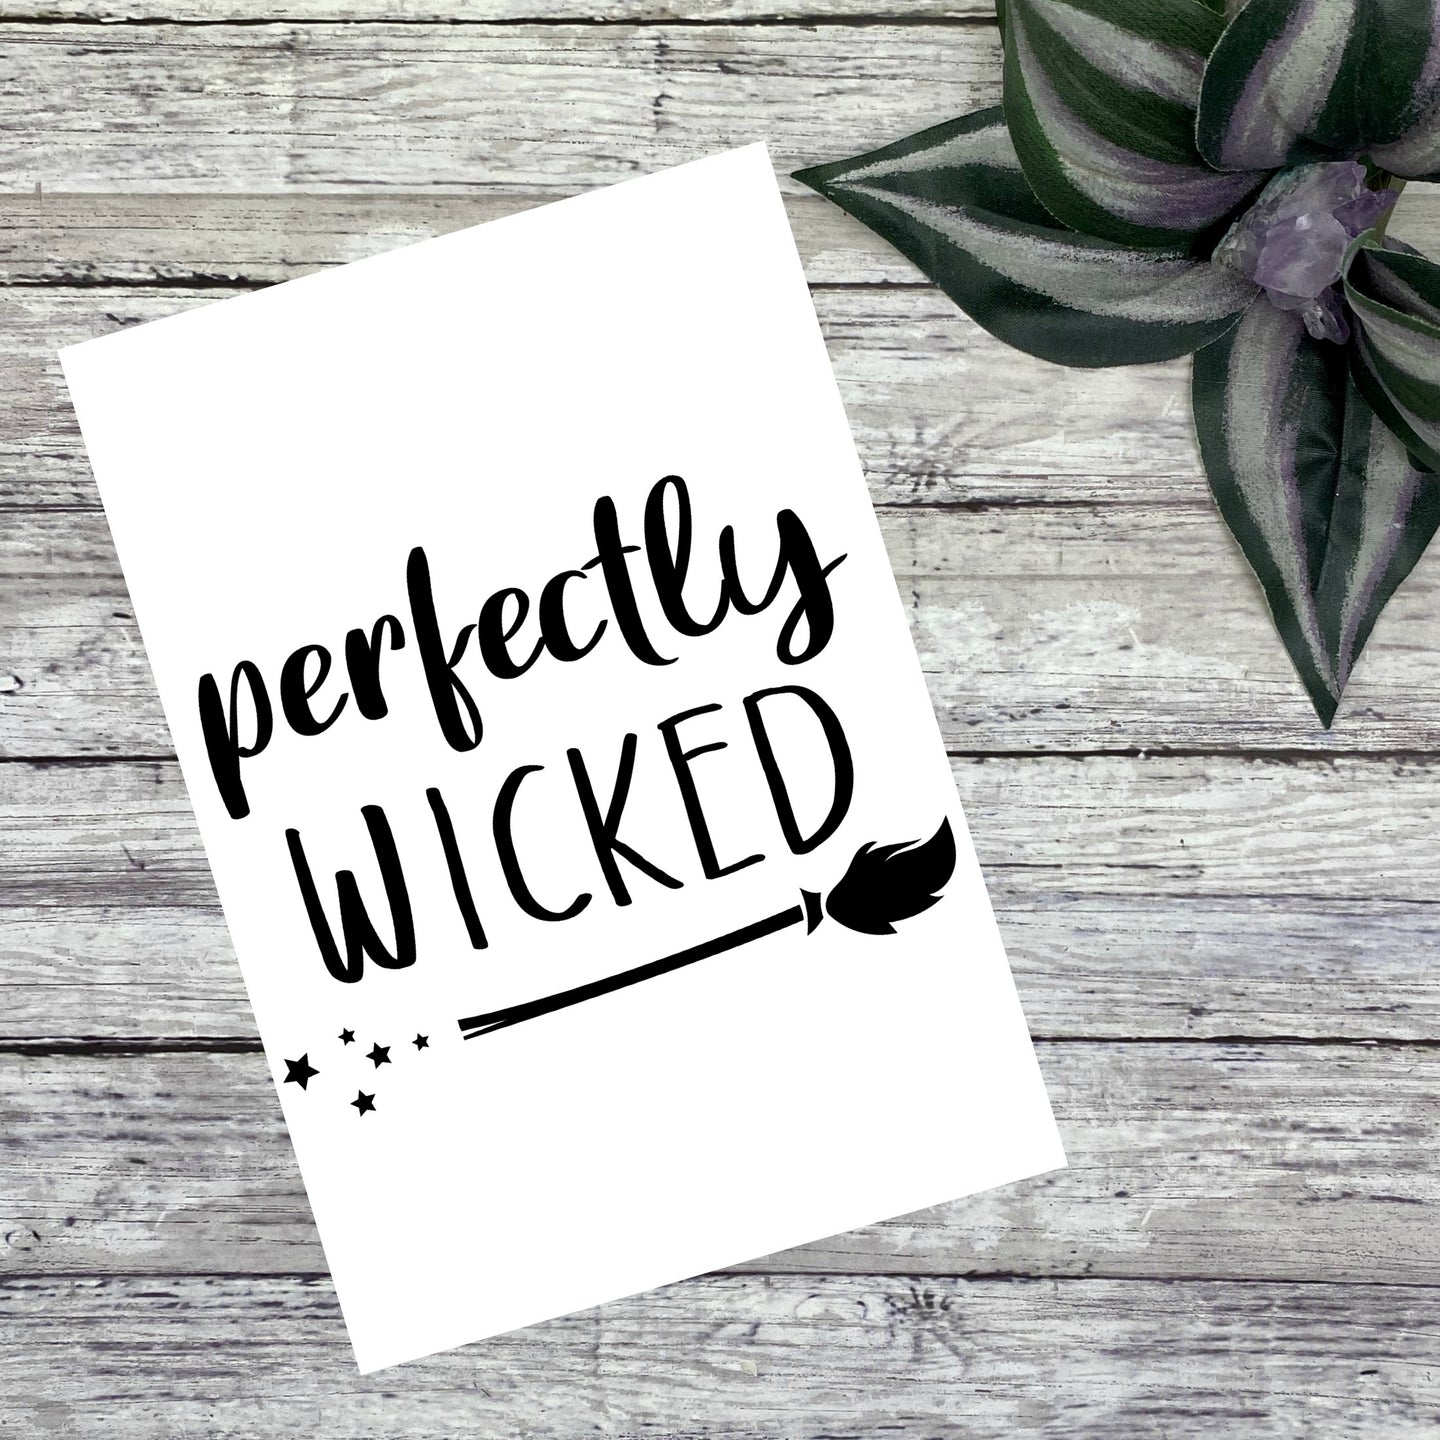 Perfectly Wicked Vinyl Decal